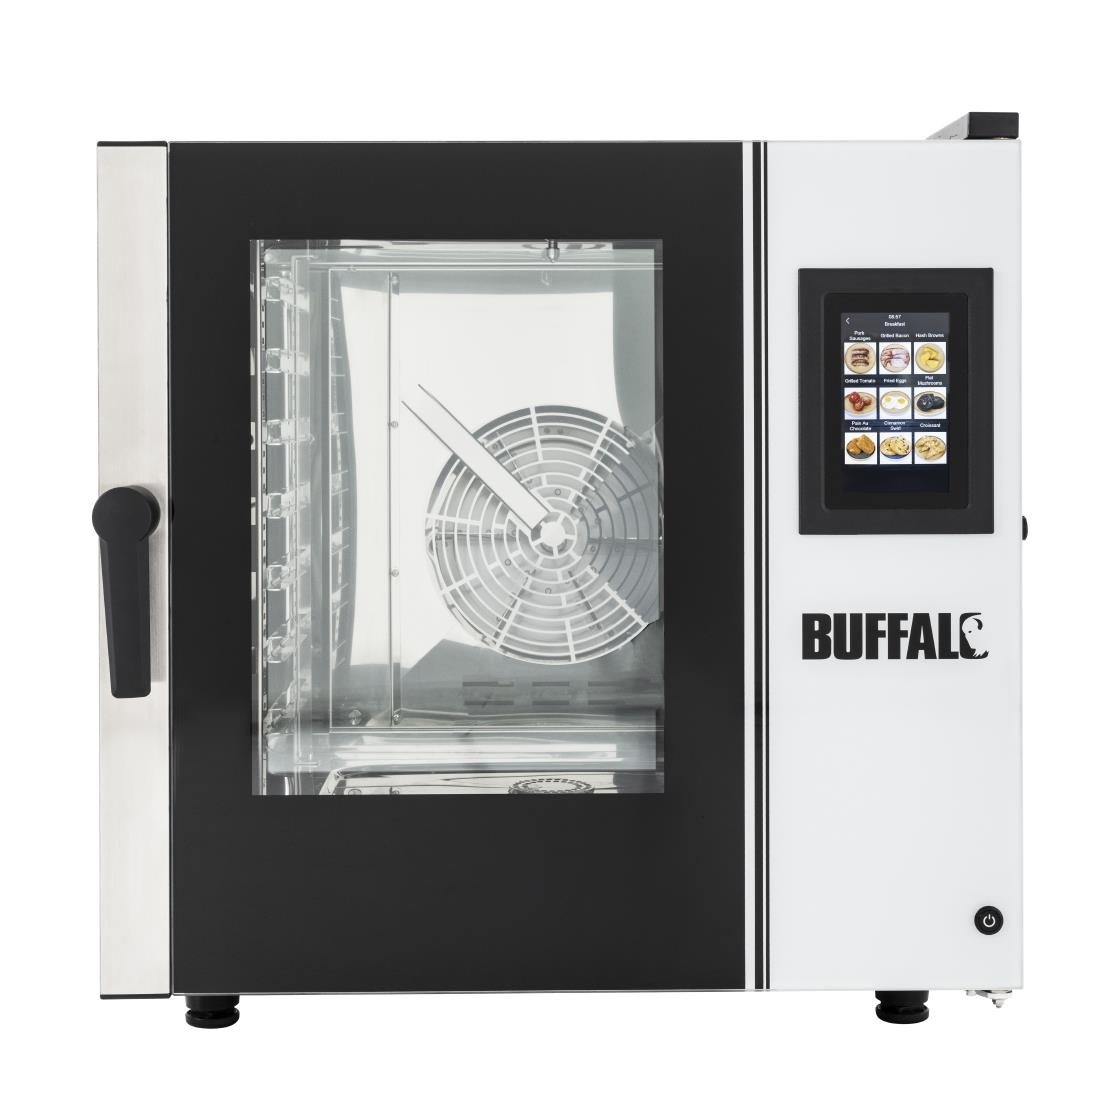 SA771 Buffalo Freestanding Smart Touchscreen Combi Oven 7 x GN 1/1 with Installation Kit and Extraction Hood